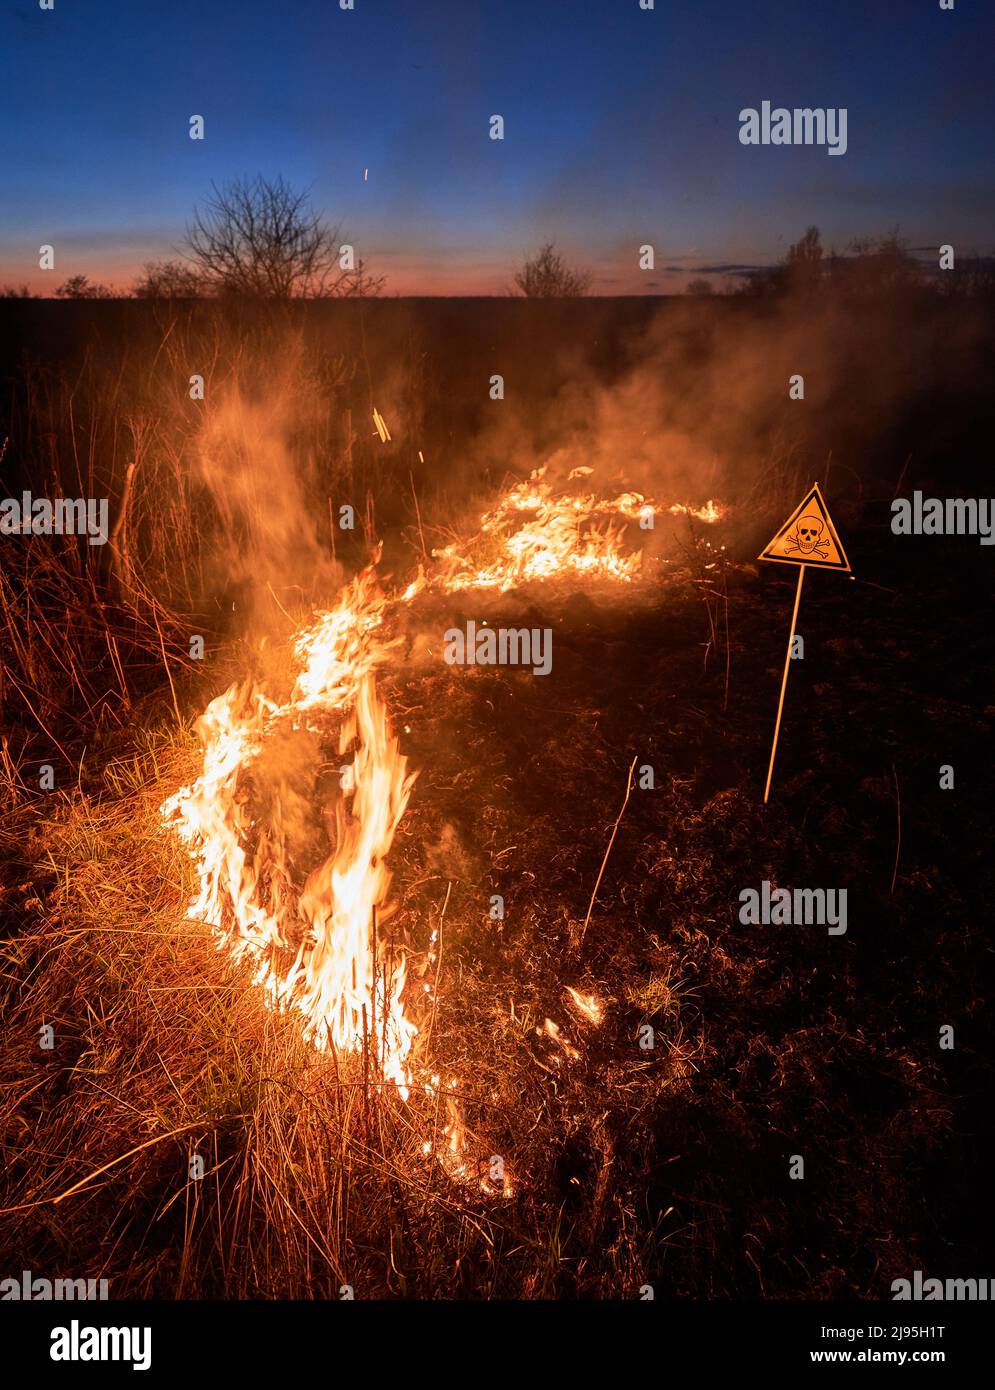 Burning dry grass and poison toxic sign at night. Yellow triangle with skull and crossbones sign warning about poisonous substances and danger in field with fire. Hazard, natural disaster concept. Stock Photo